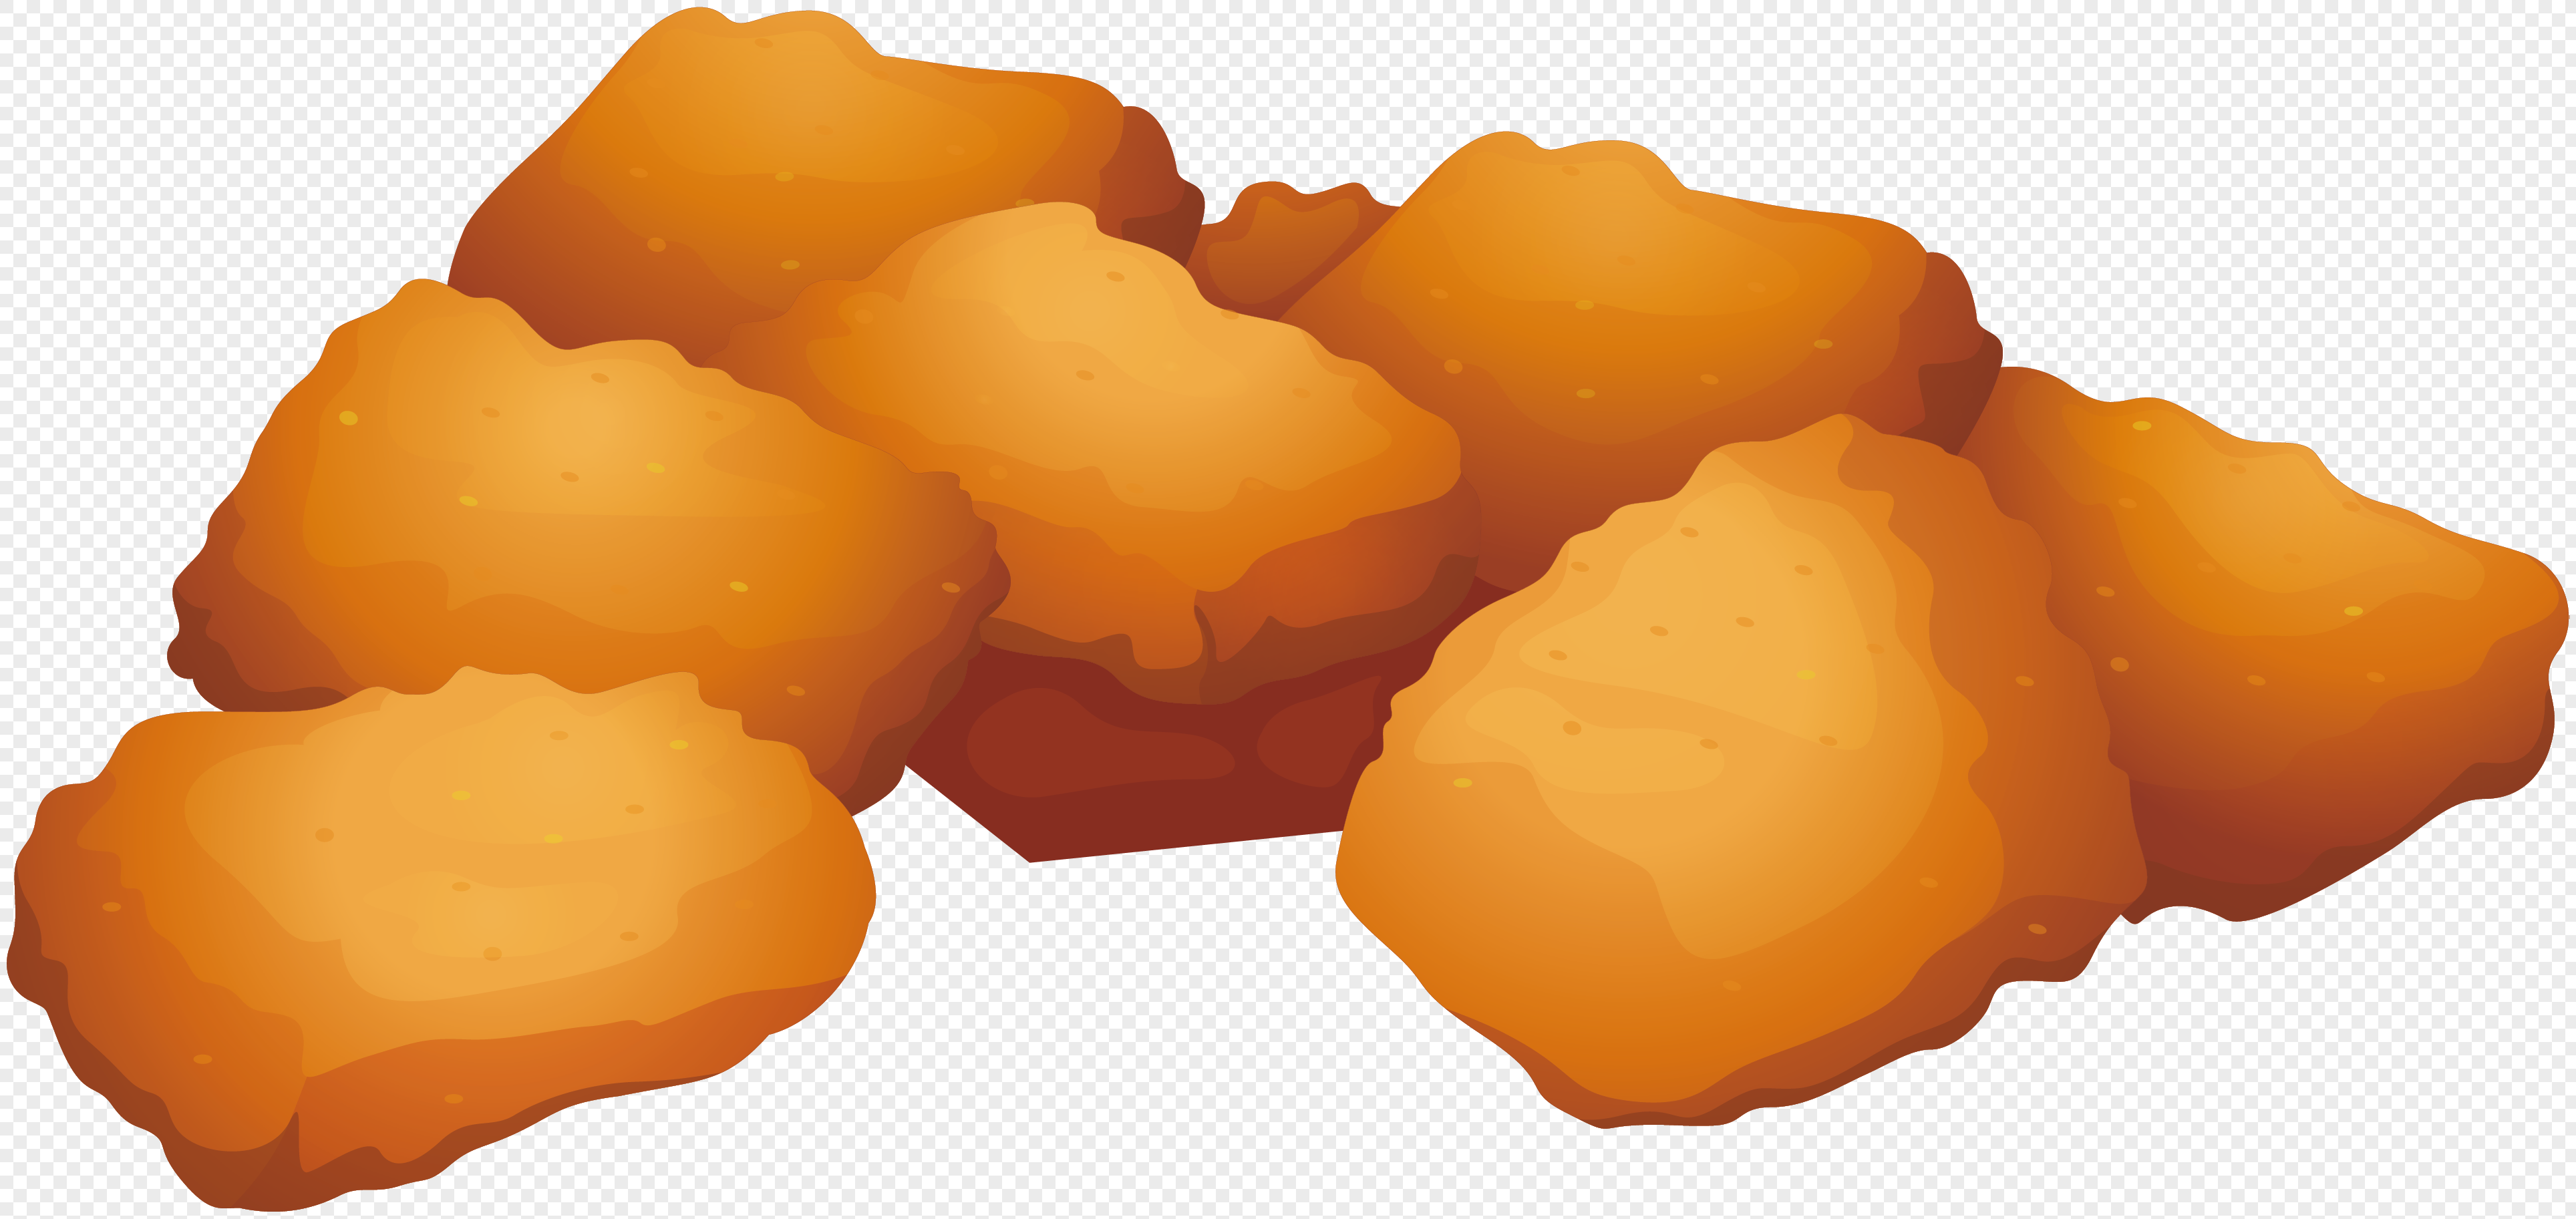 Cartoon chicken nugget vector material png image_picture free download